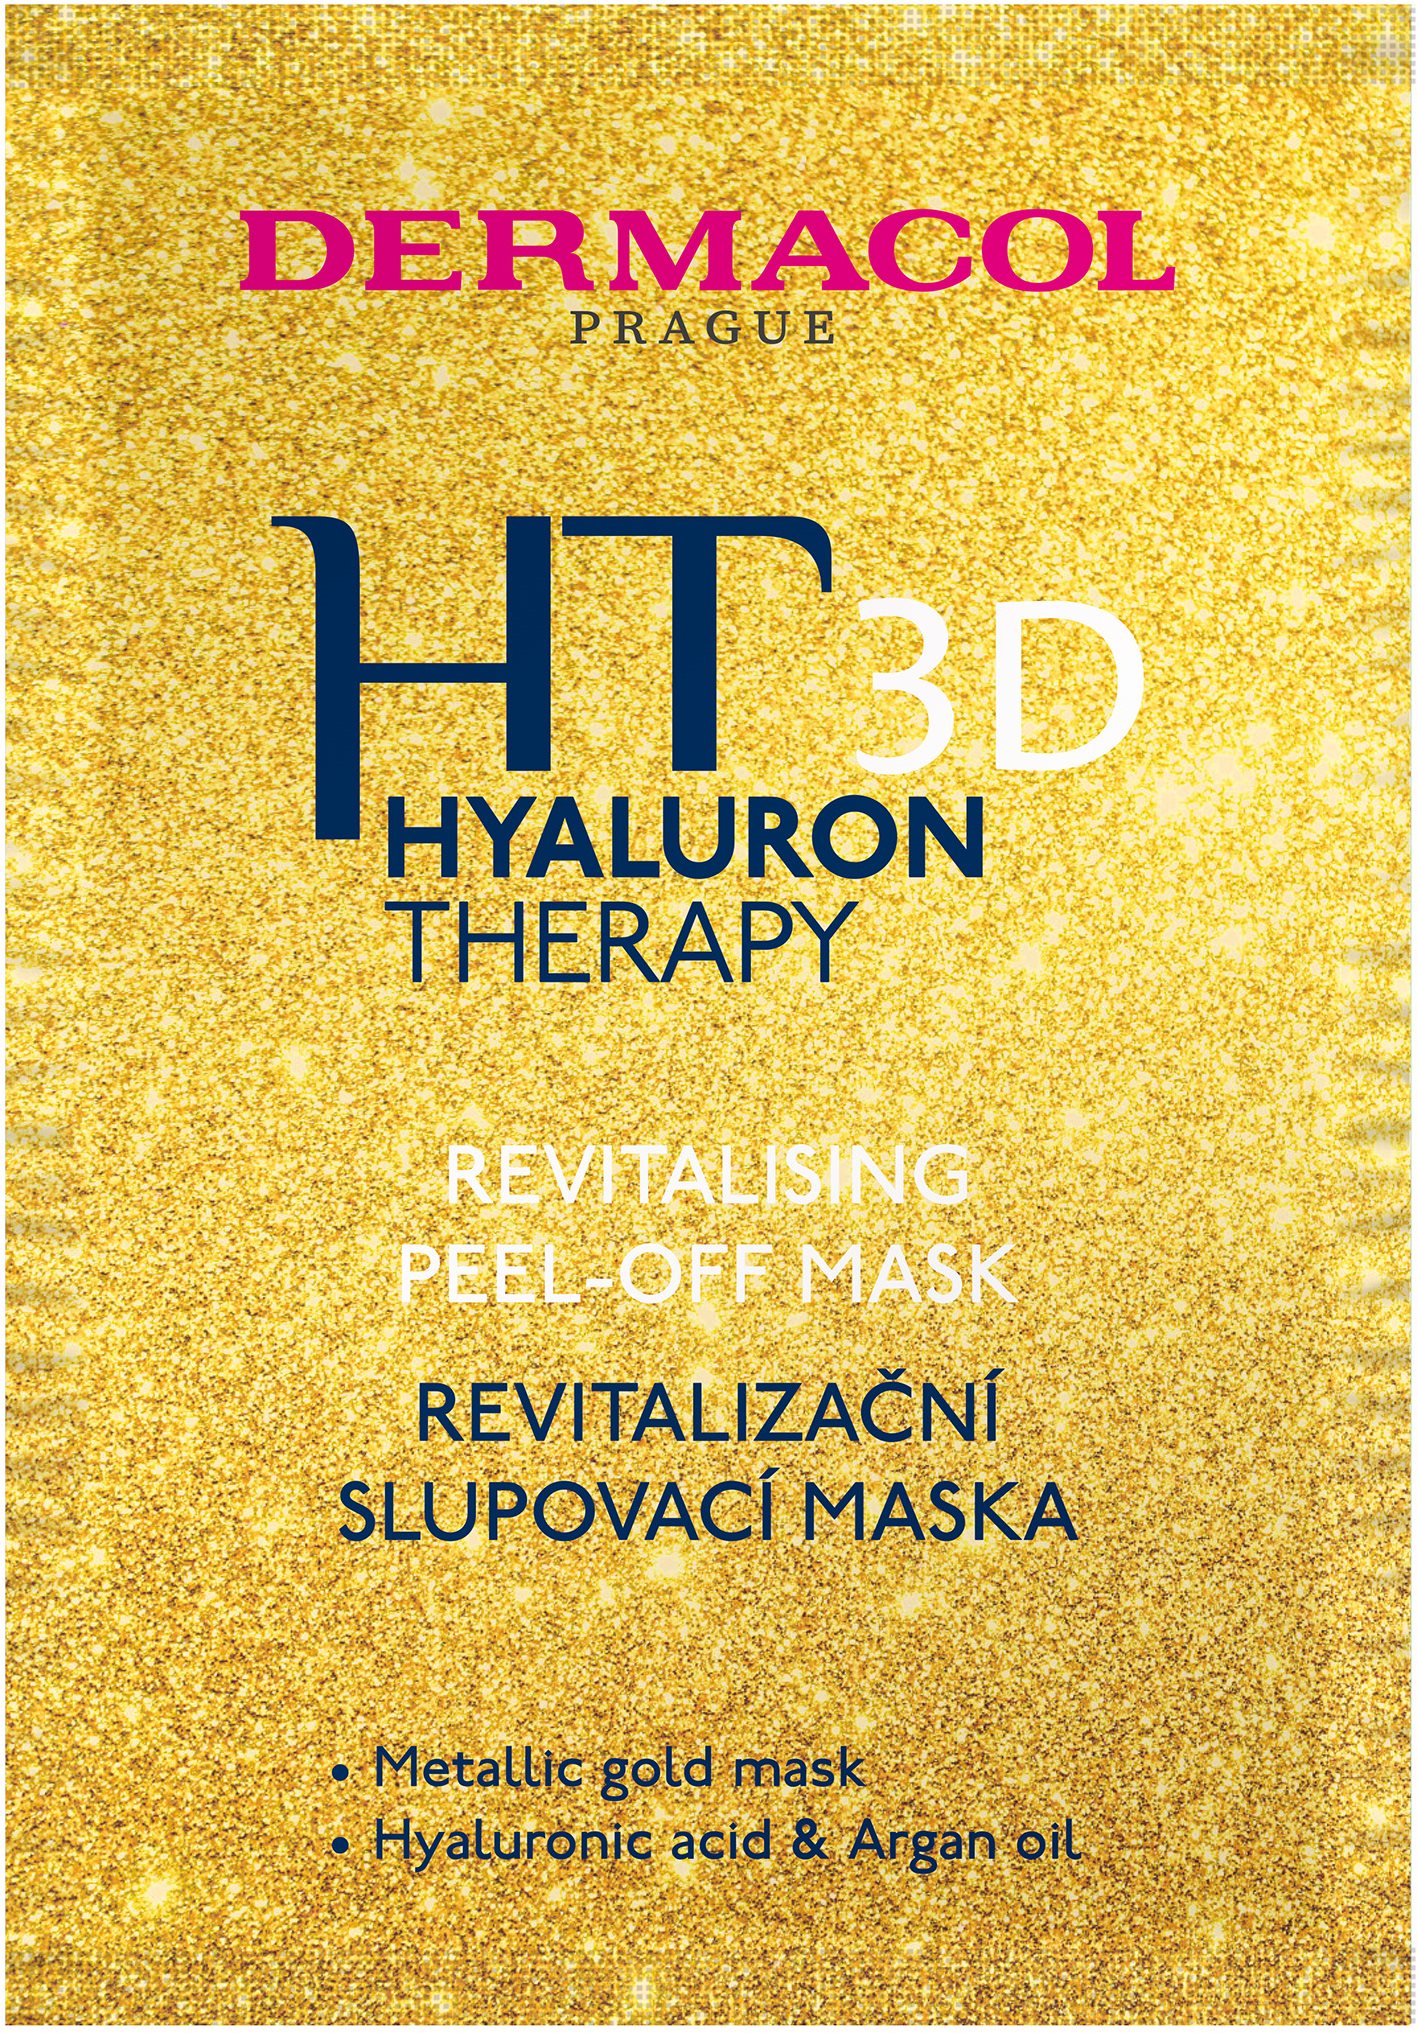 DERMACOL Hyaluron Therapy 3D Revitalising Peel-Off Mask 18 ml